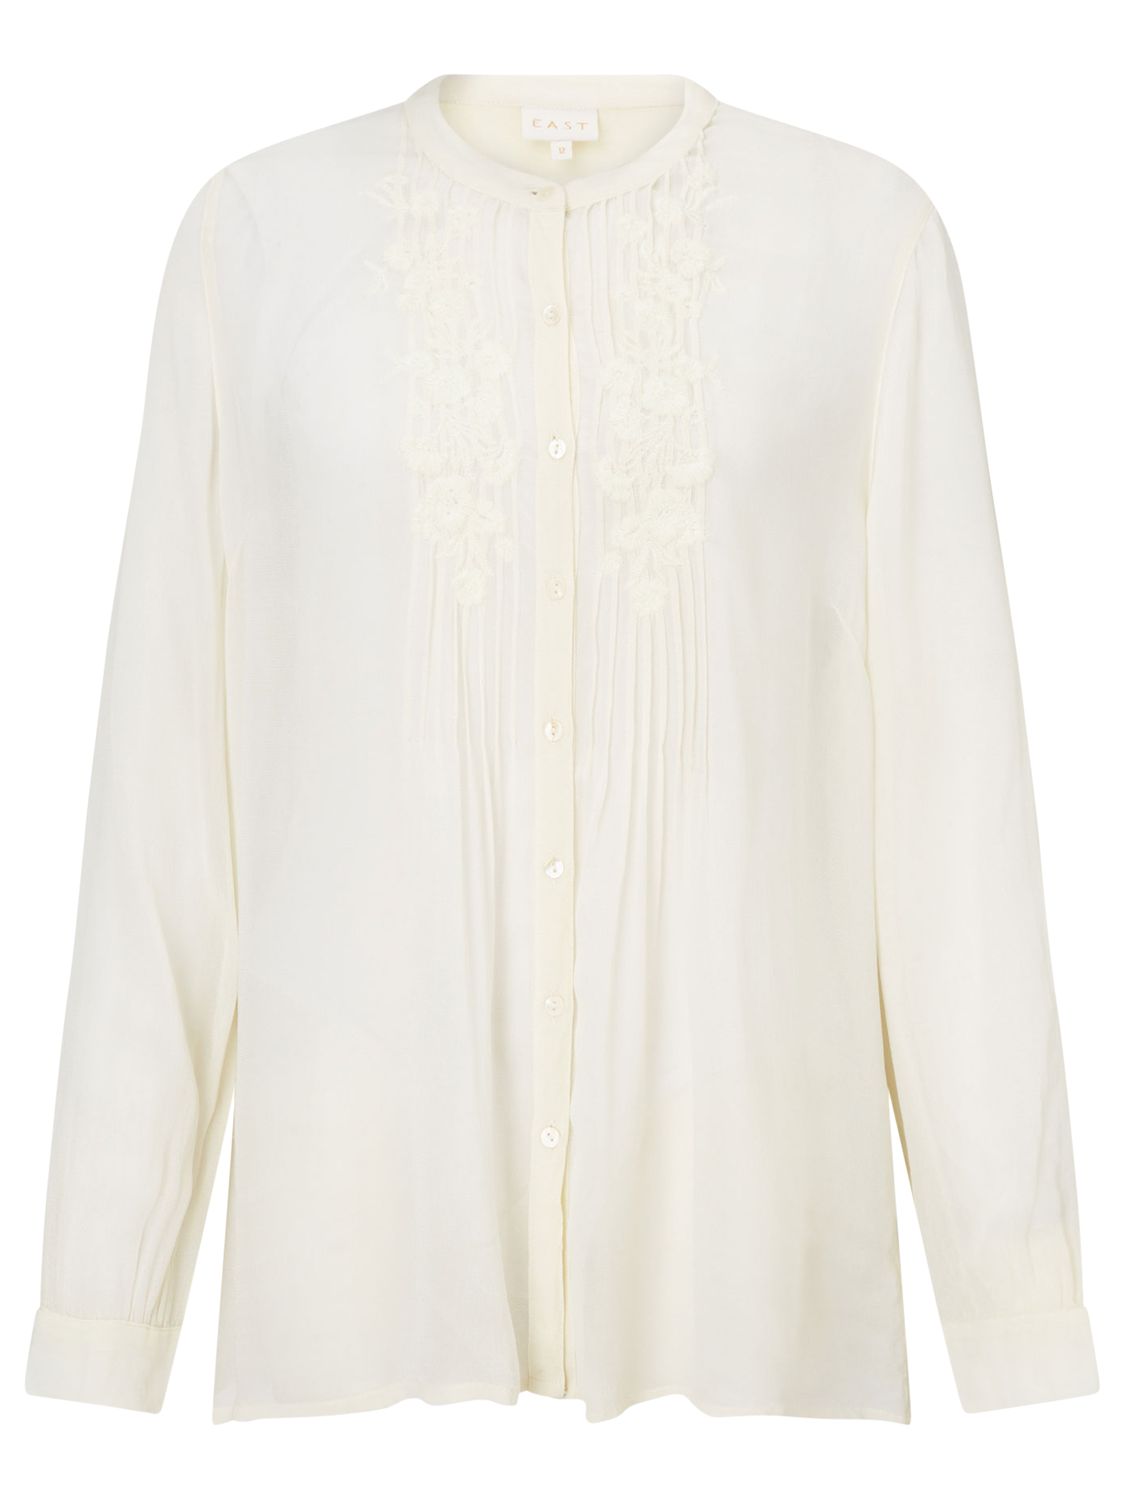 1900s Edwardian Style Blouses, Tops & Sweaters